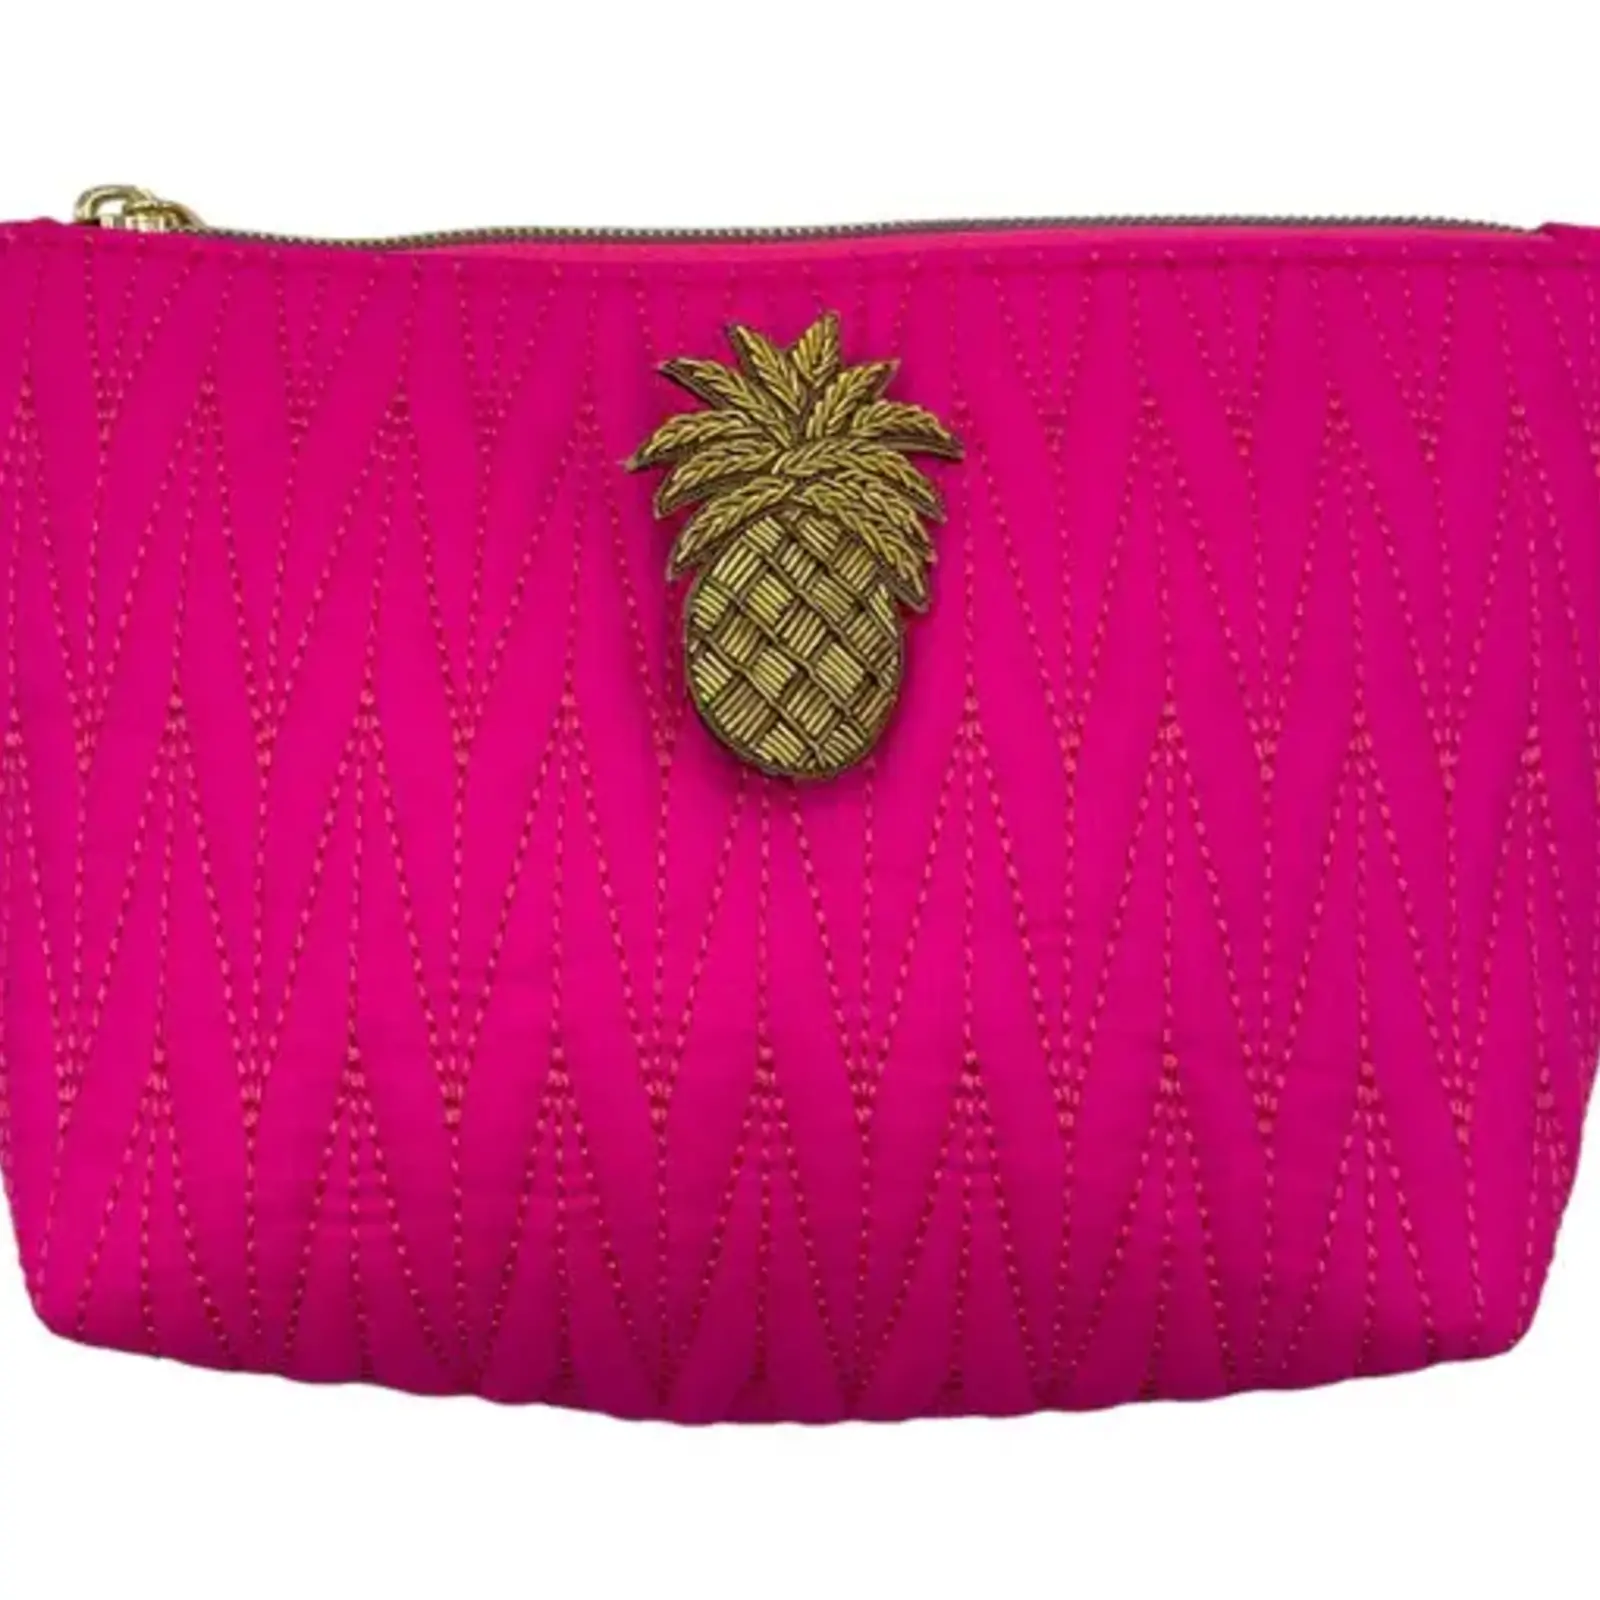 Sixton London Bright Pink Large  Makeup Bag with Pineapple  oi_du5y6h4vyf loading=